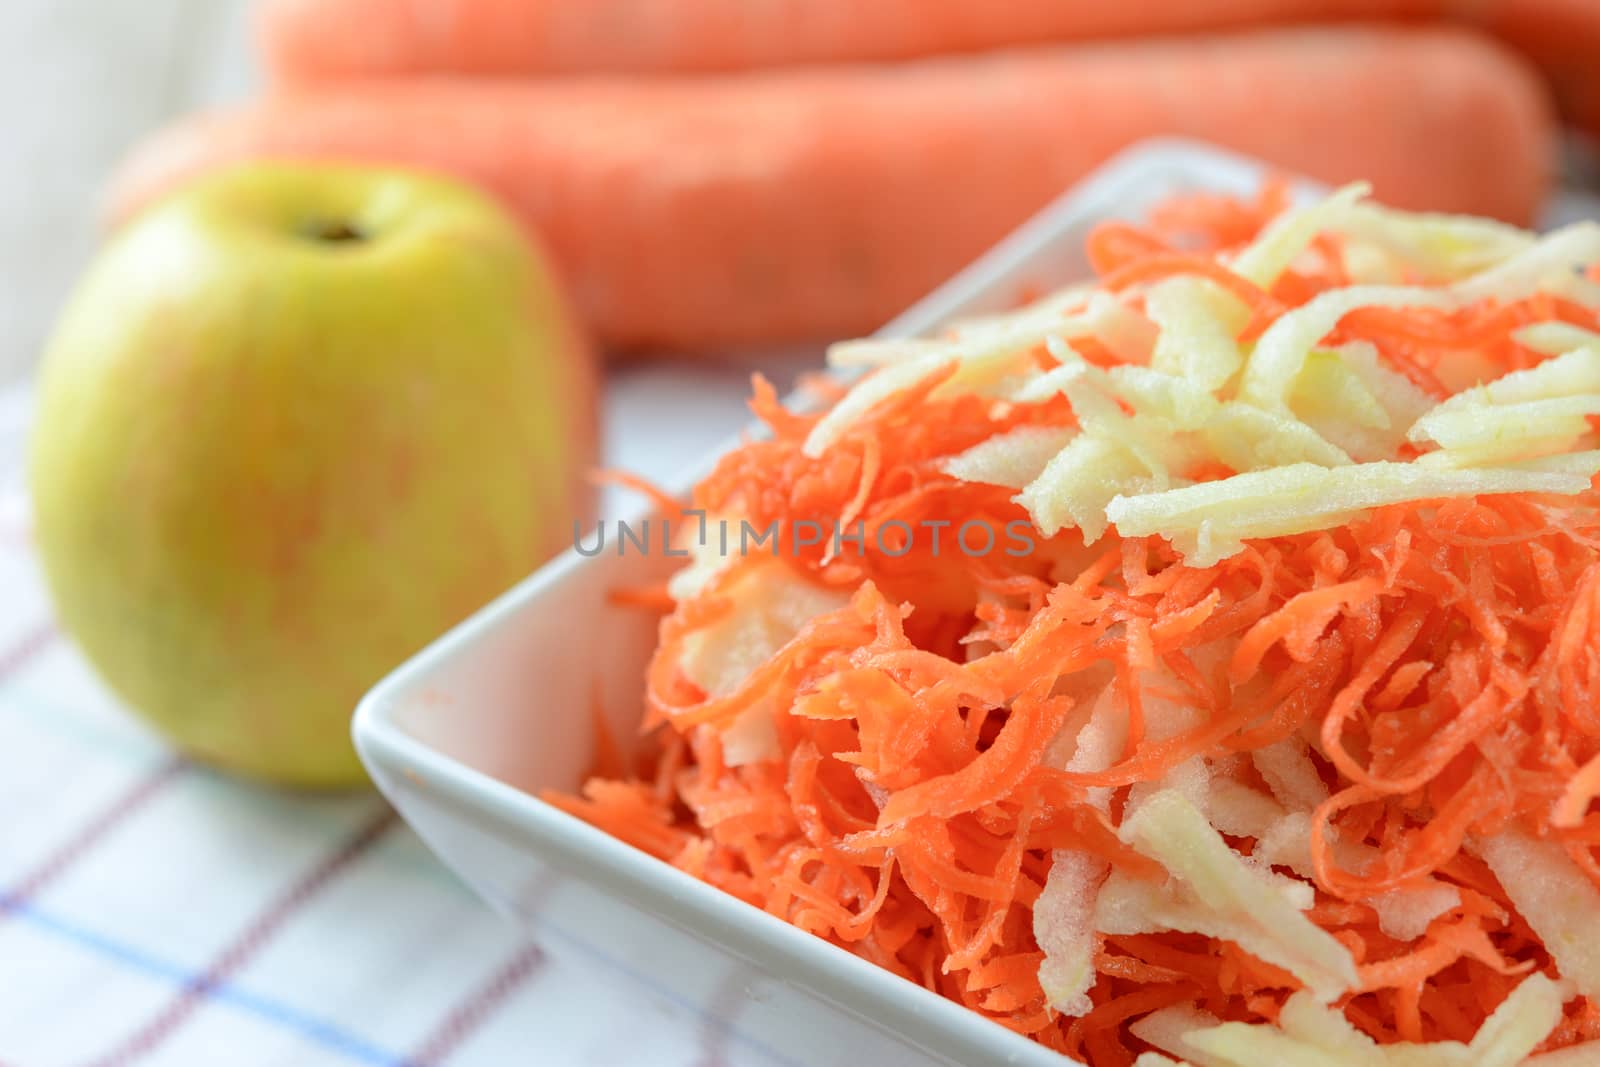 Healthy salad concept - grated carrot with apple in a white platter in close-up